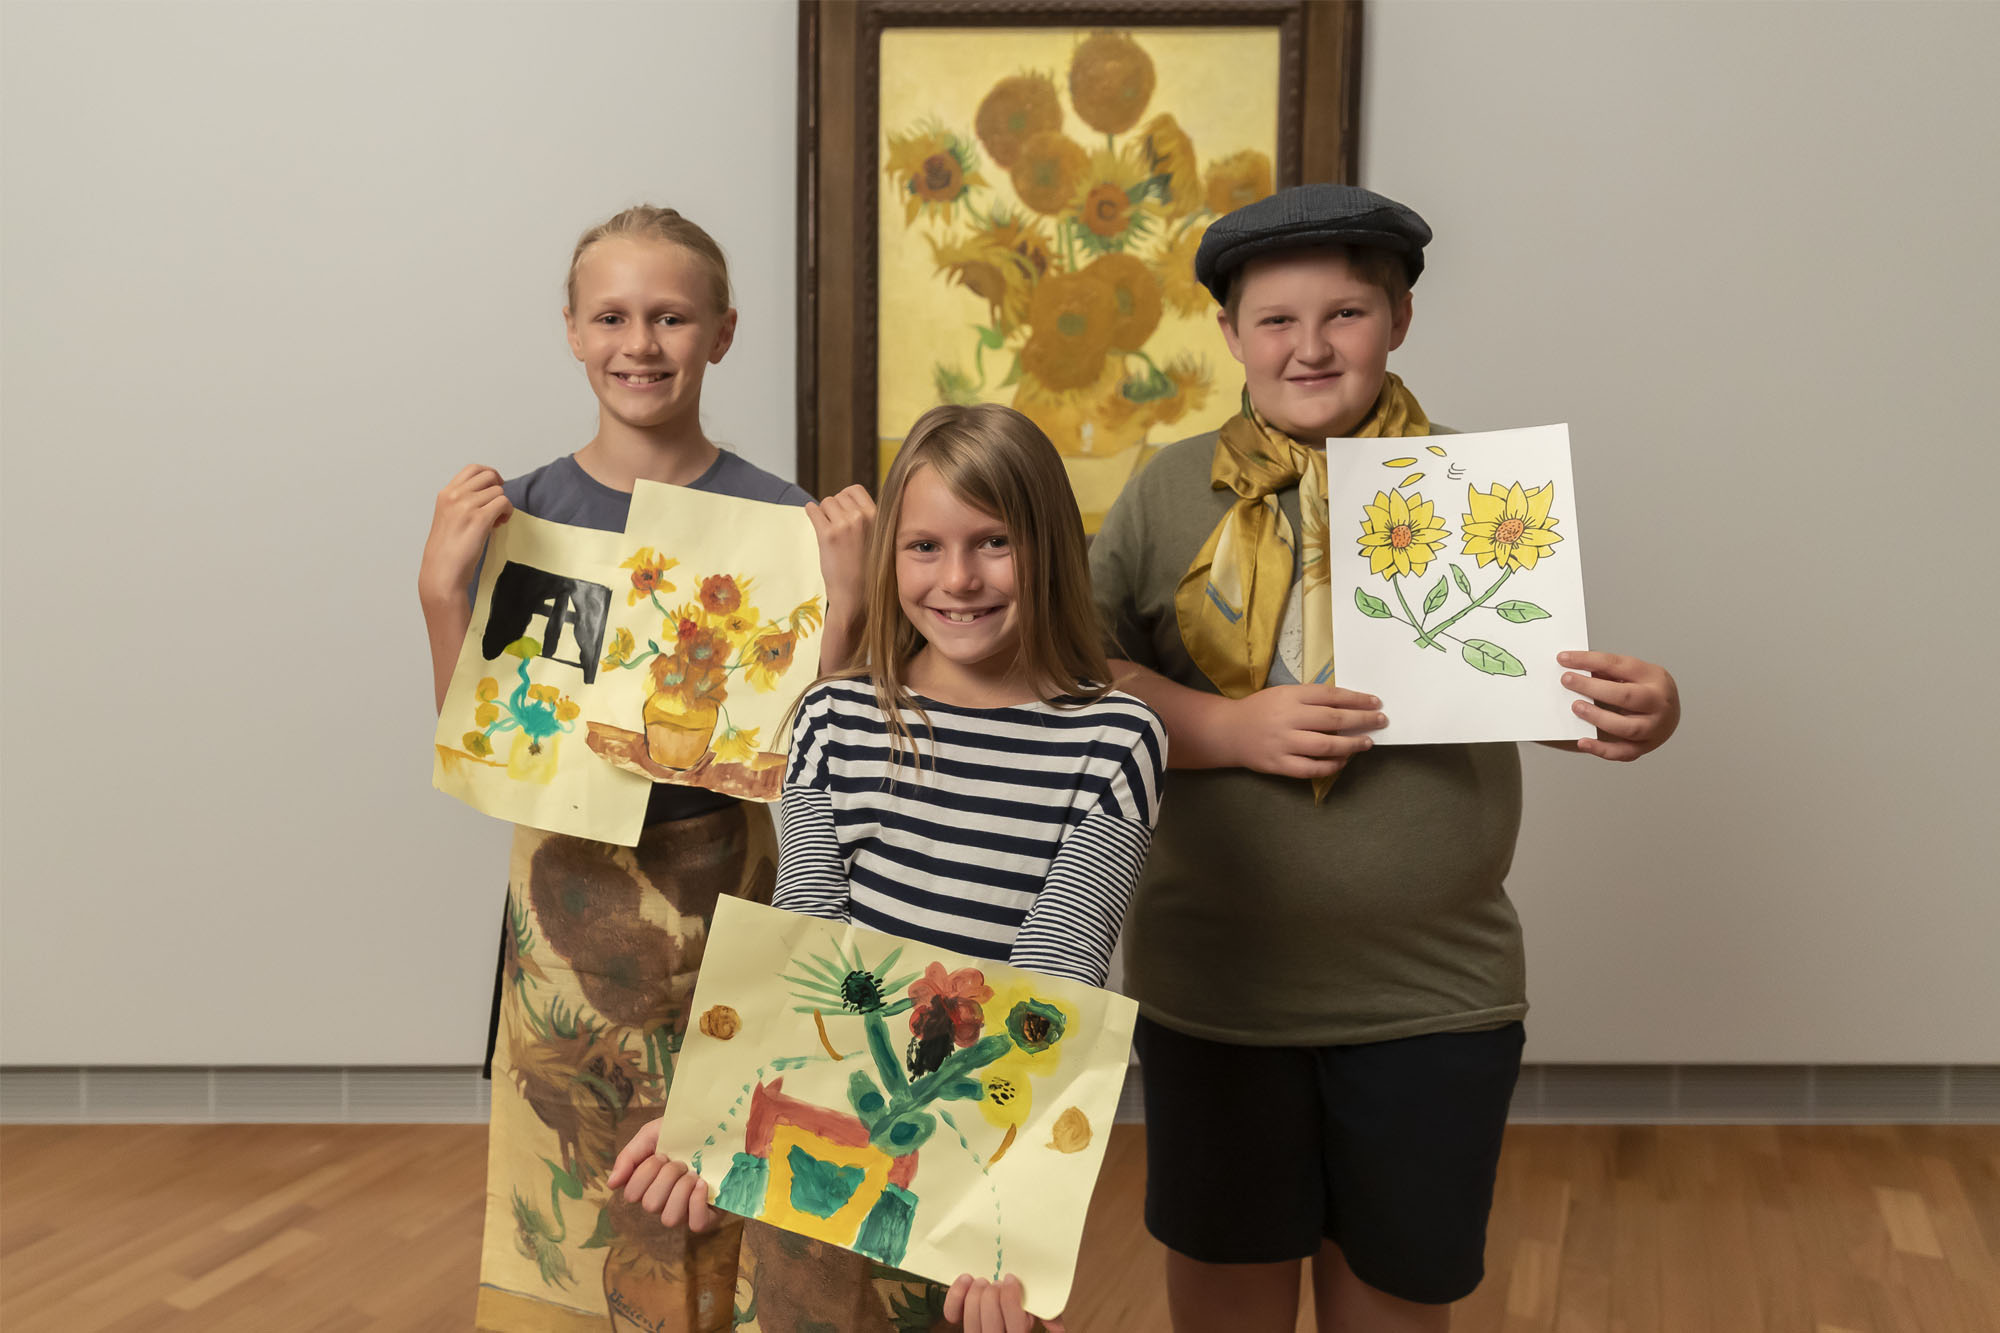 Recreate Sunflowers and win in NGA and oOh!media competition